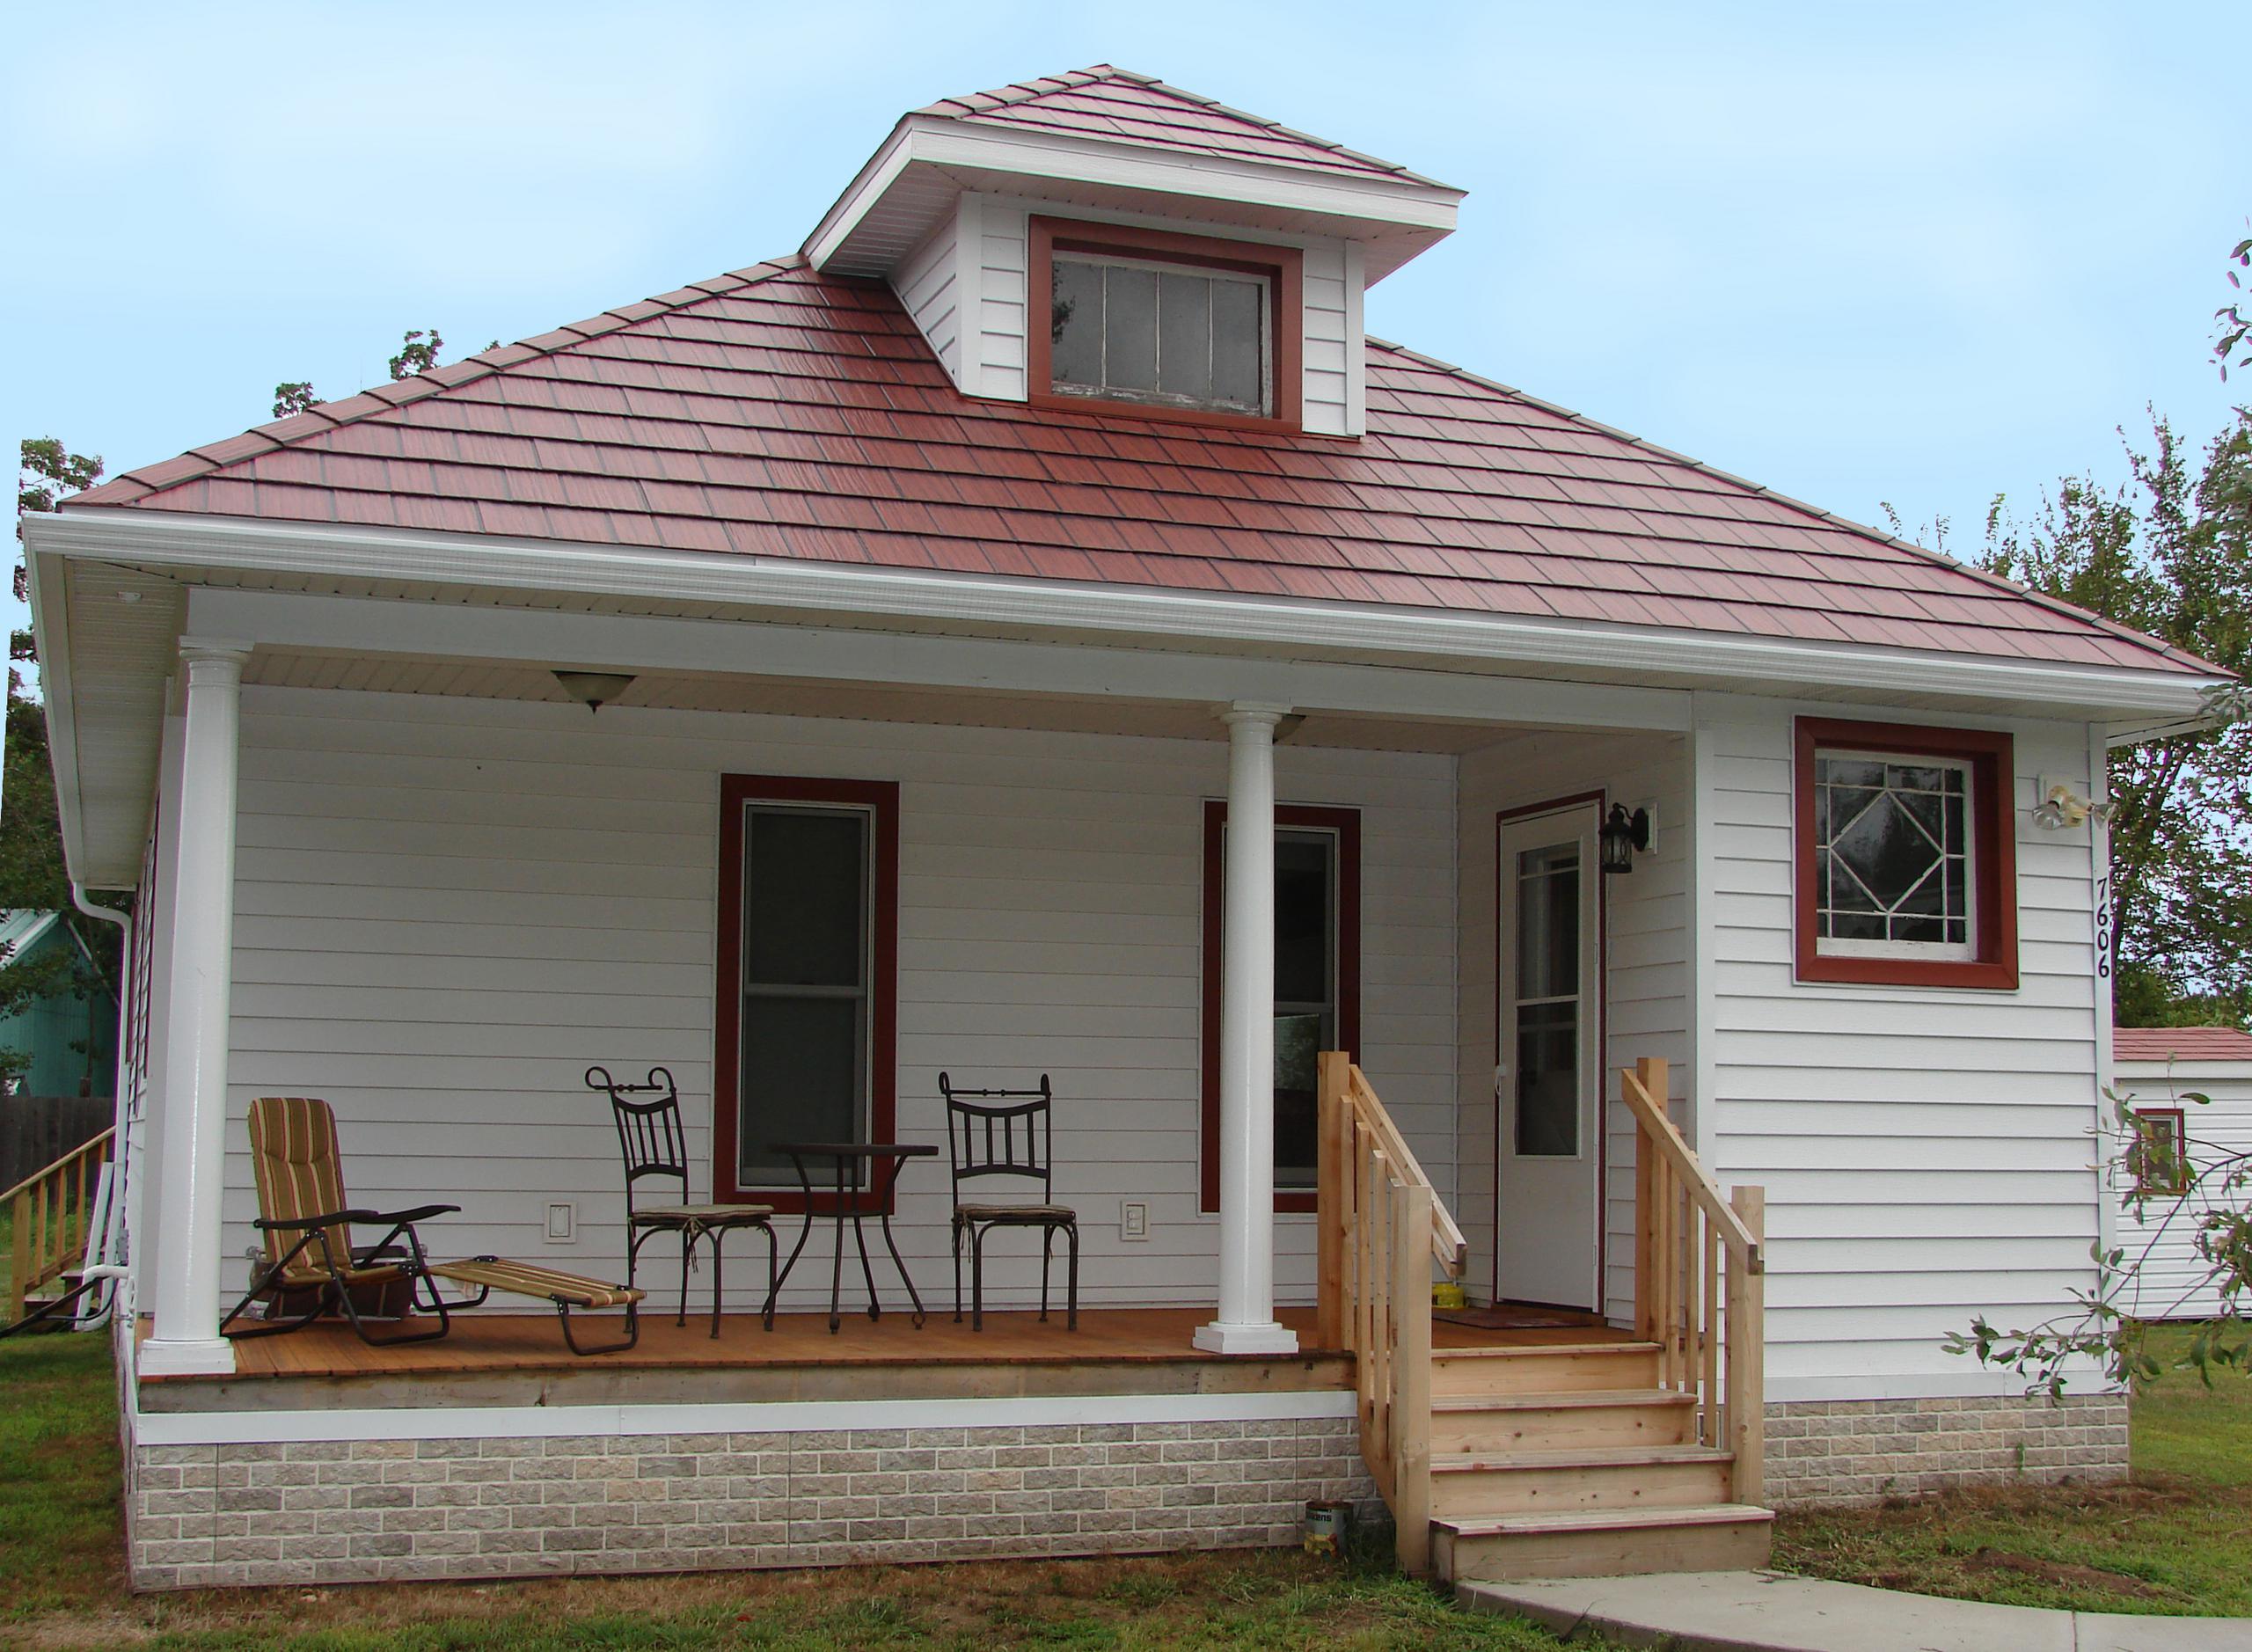 The homeowners of a small cottage in Wisconsin selected Generations Shake Classic Red HD Roofing to keep the same style and character that the home has always had in the community.